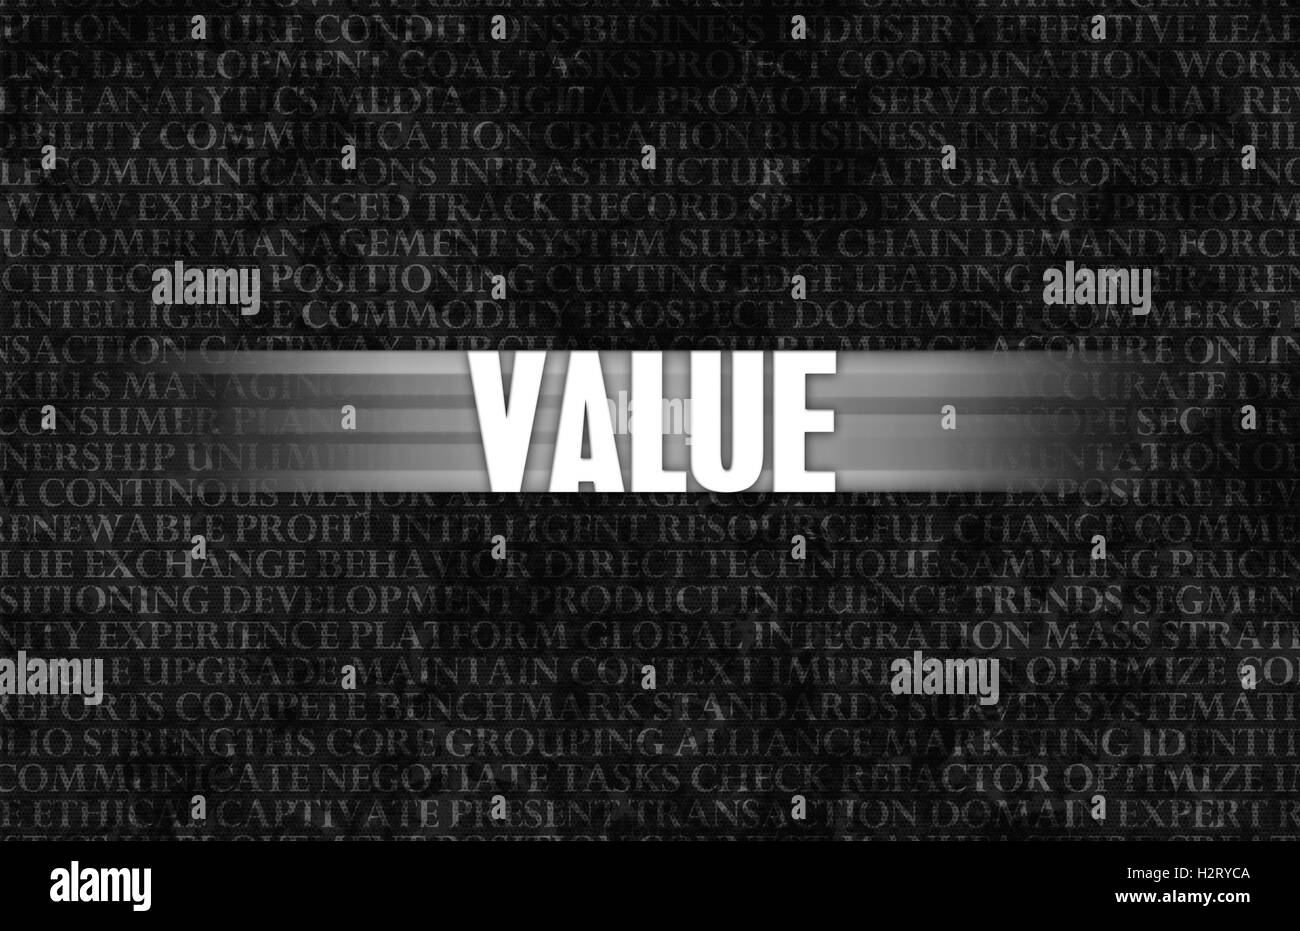 Value in Business as Motivation in Stone Wall Stock Photo